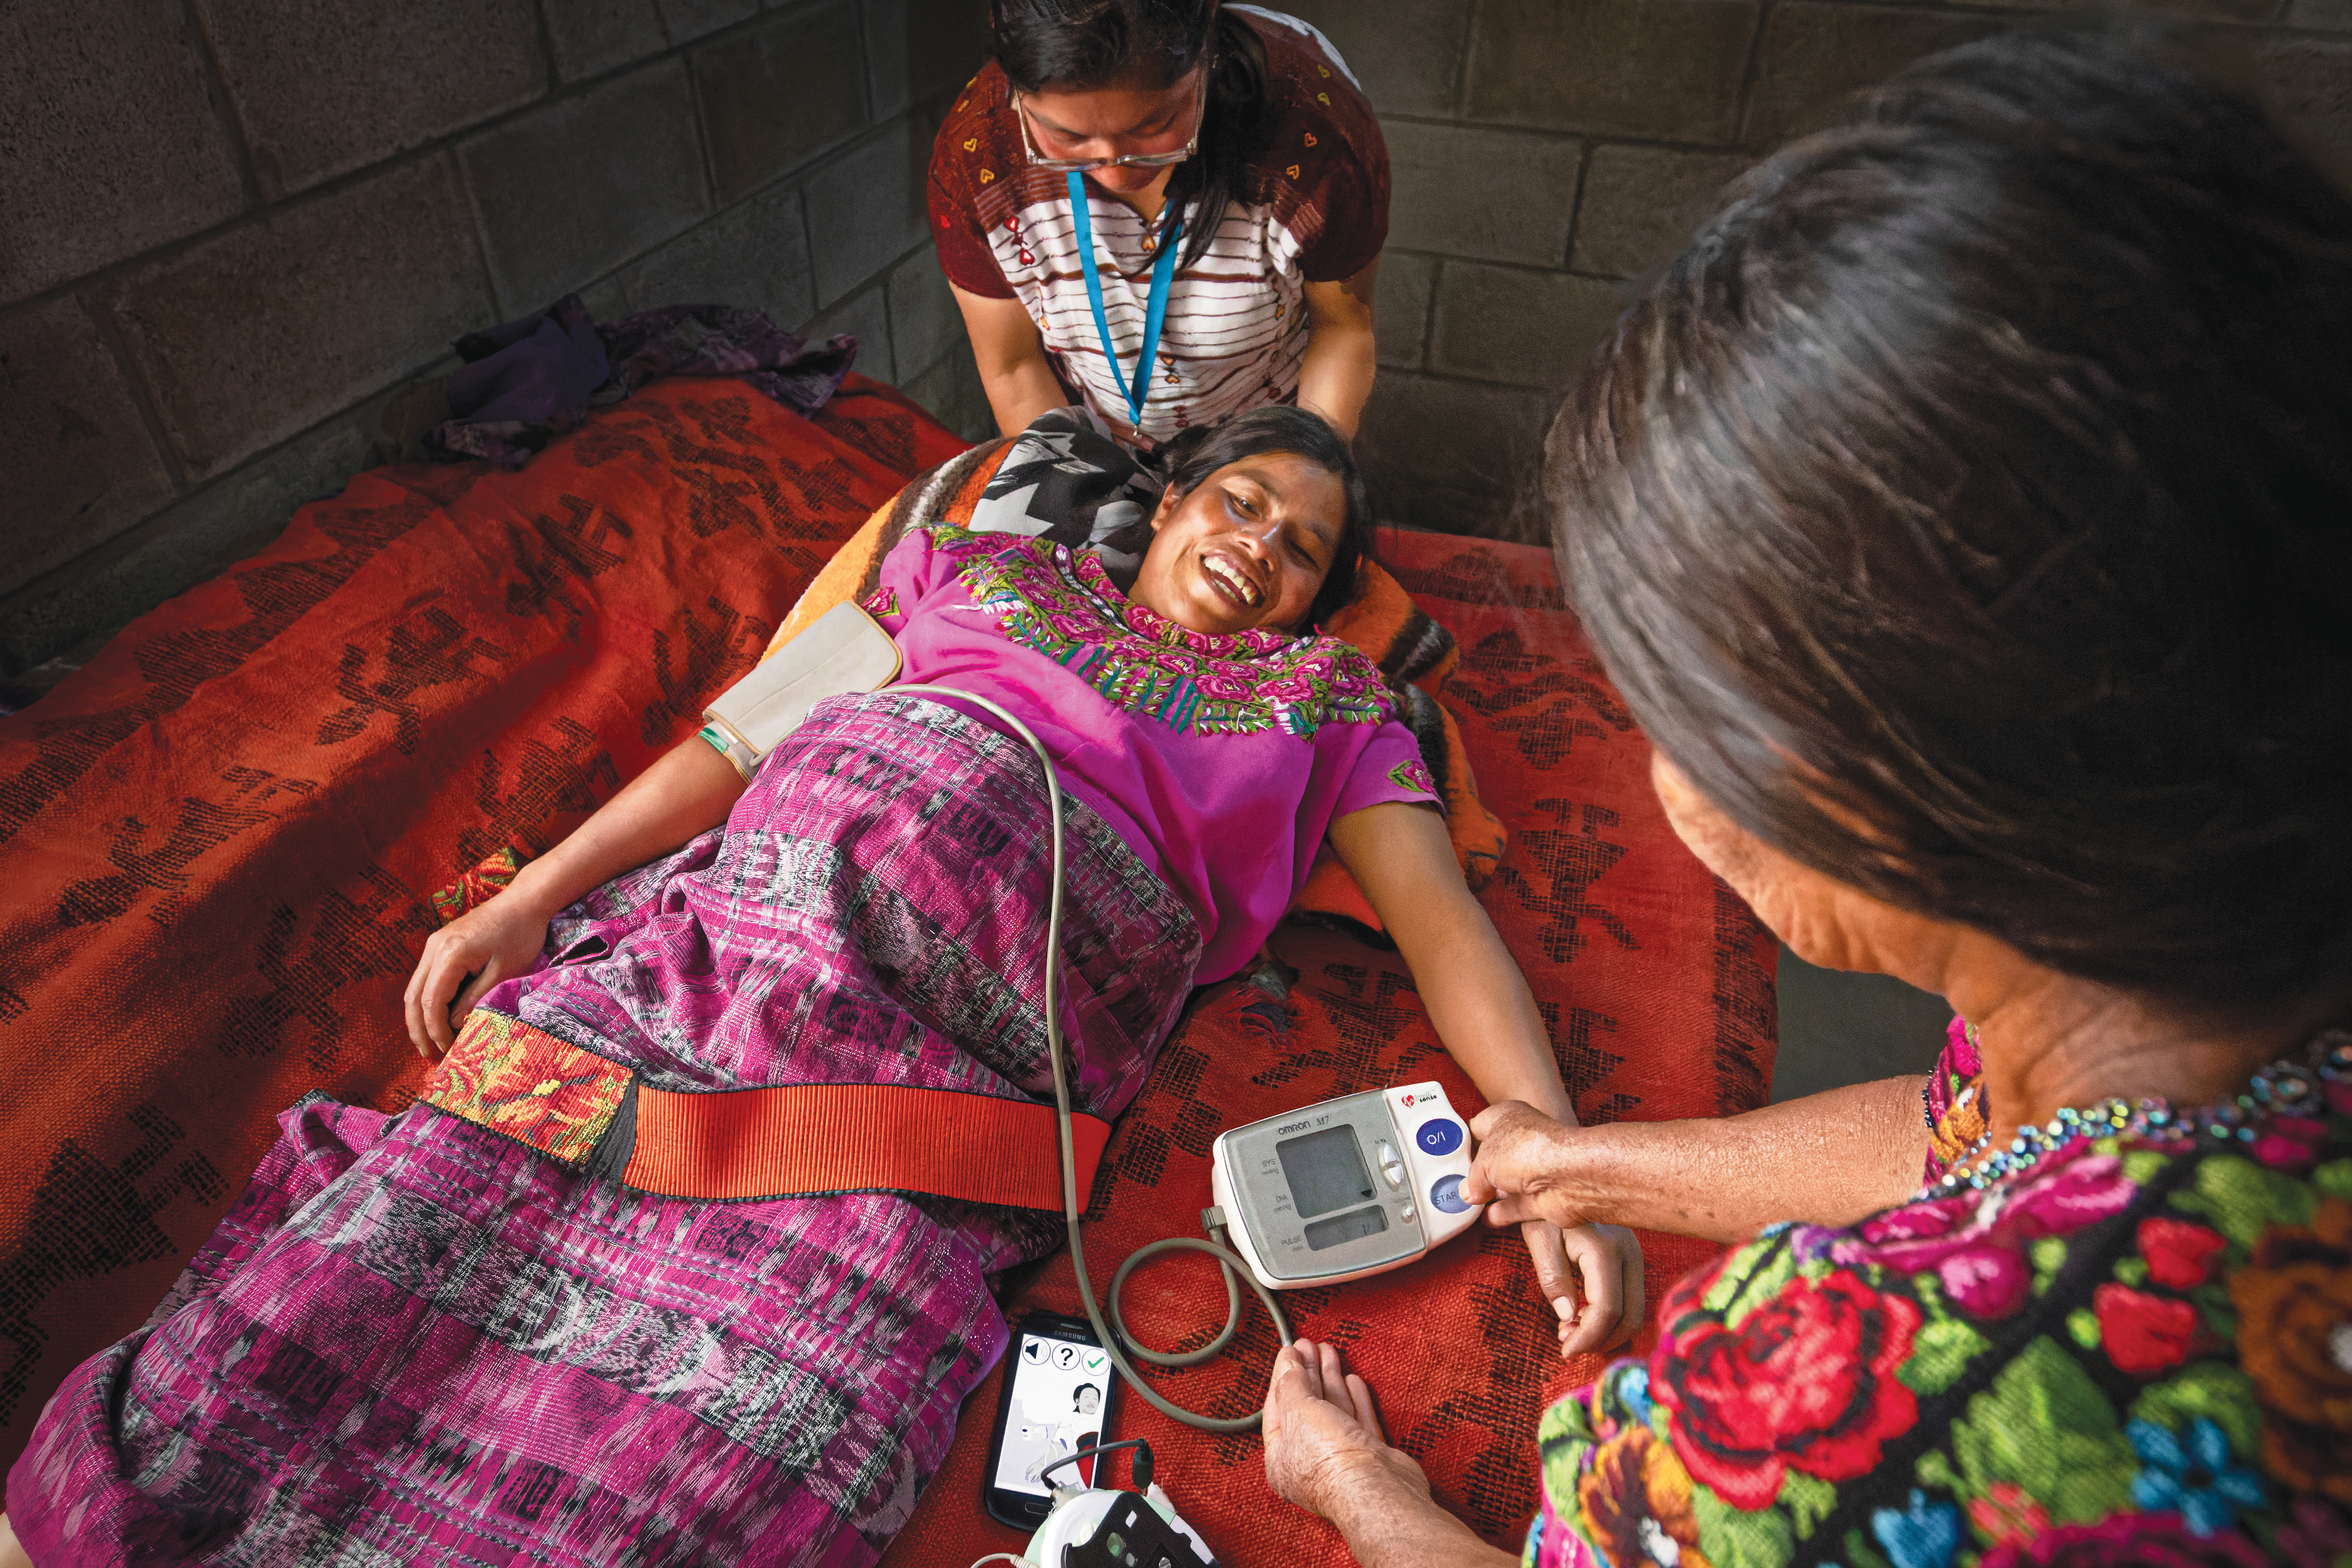 A colorfully dressed woman lies on a blanket while being attended to by a woman using a smartphone